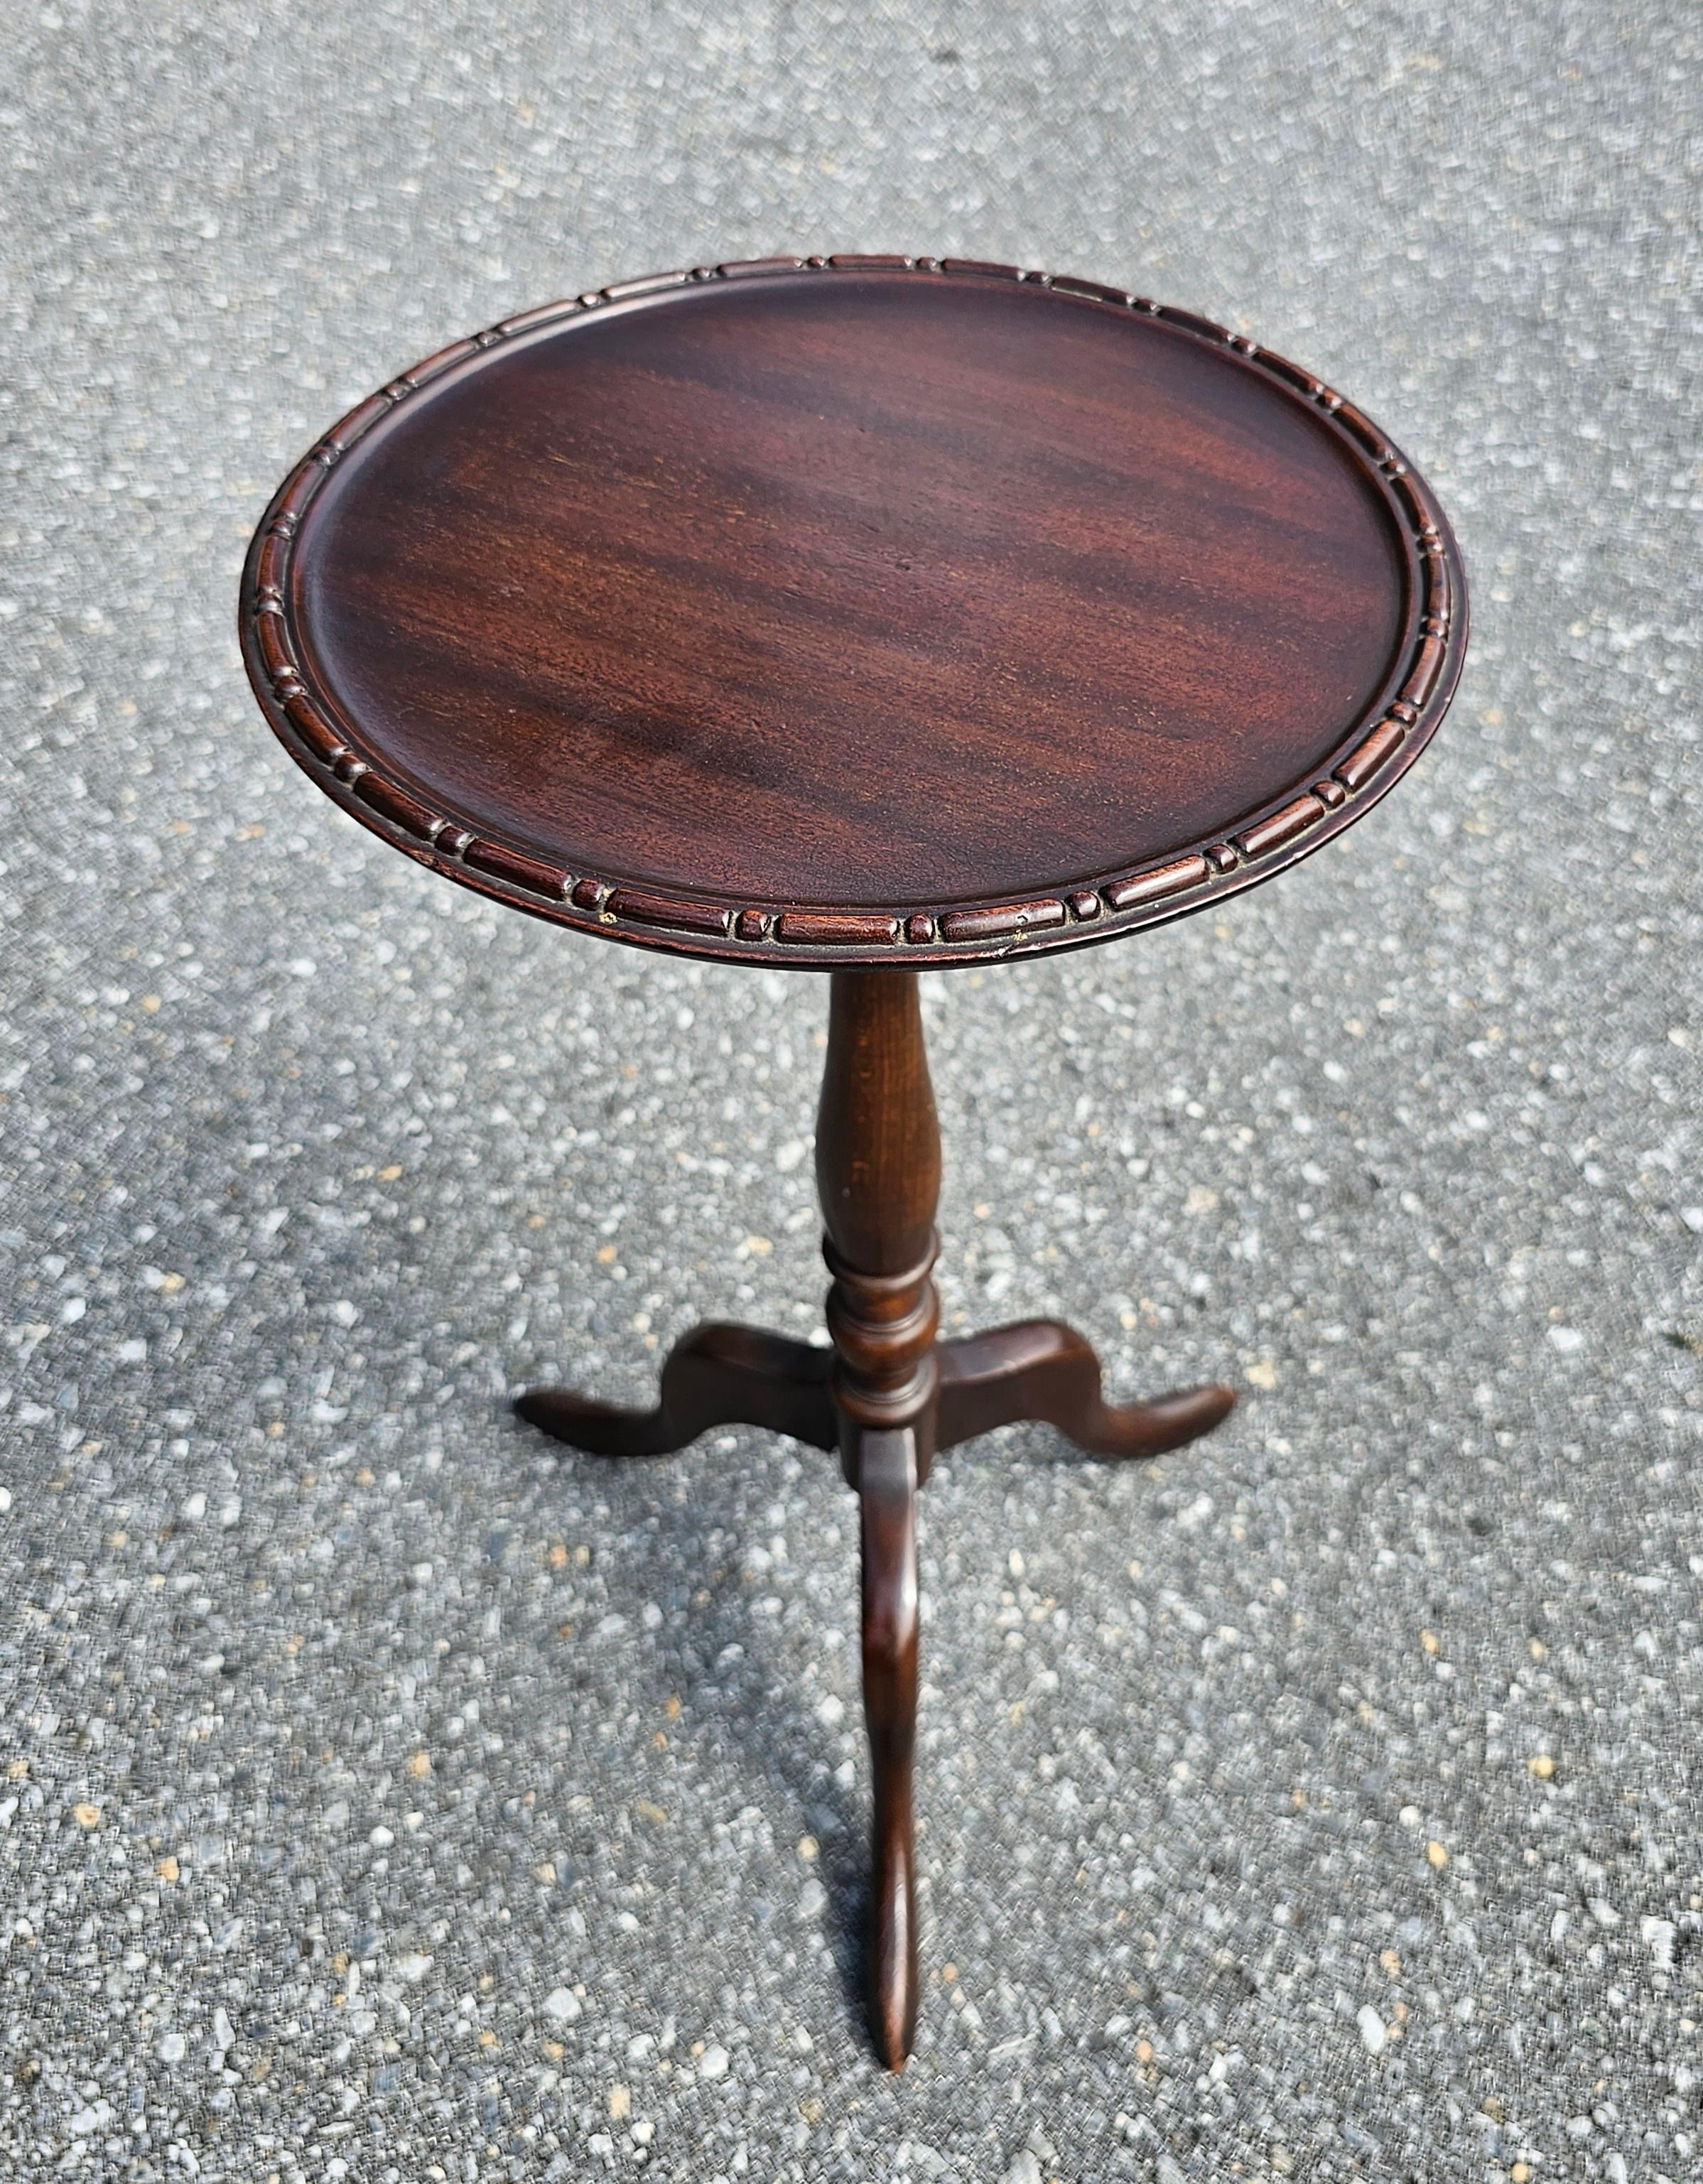 An Early 20th Century refinished Mahogany galleries Pedestal candle stand with finely carved tripod snake feet. Measures 12